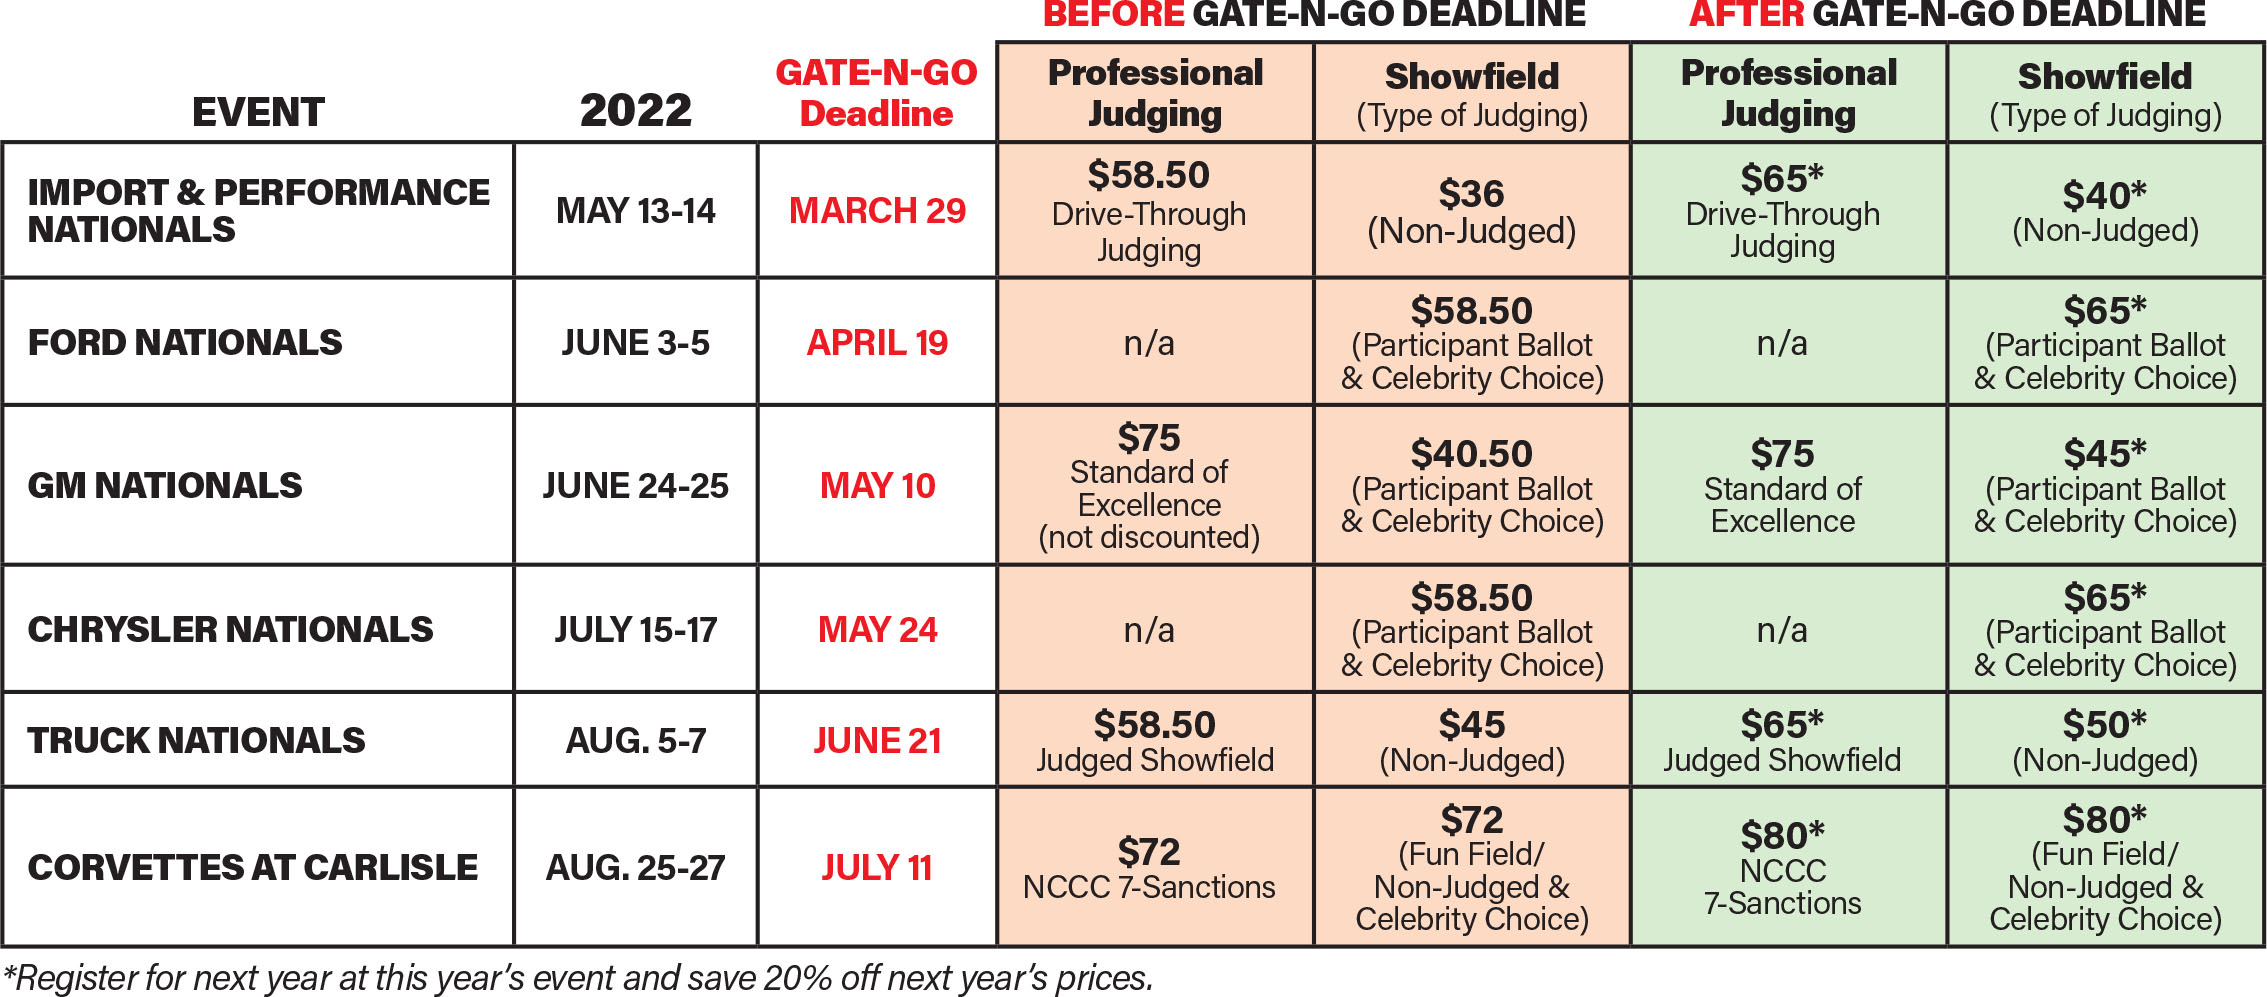 Gate-N-Go Information and Pricing Chart